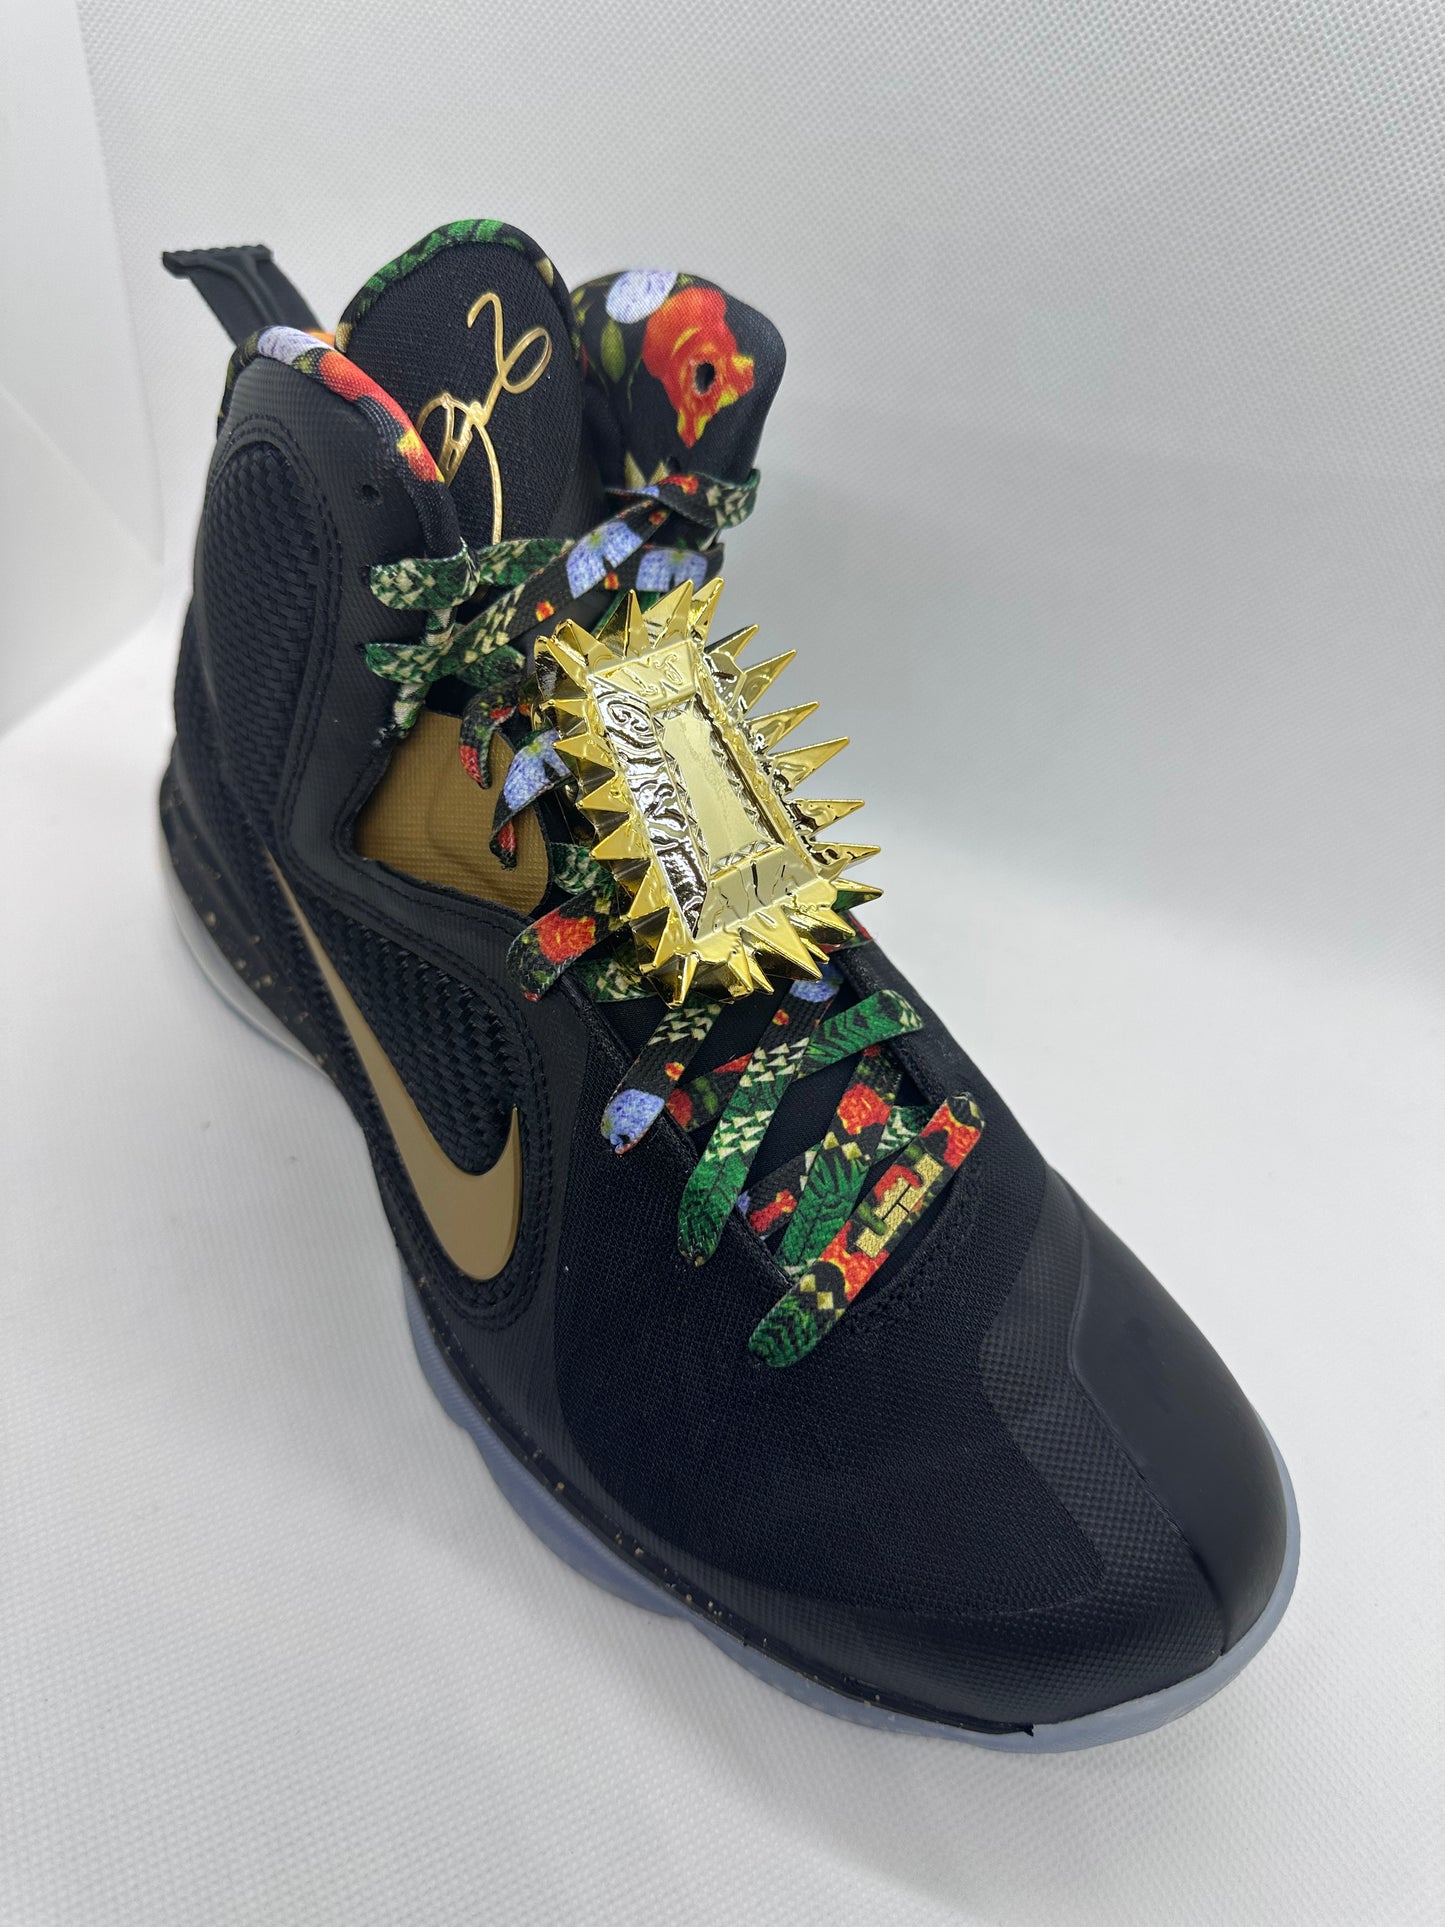 LEBRON 9 "Watch the Throne 2022"